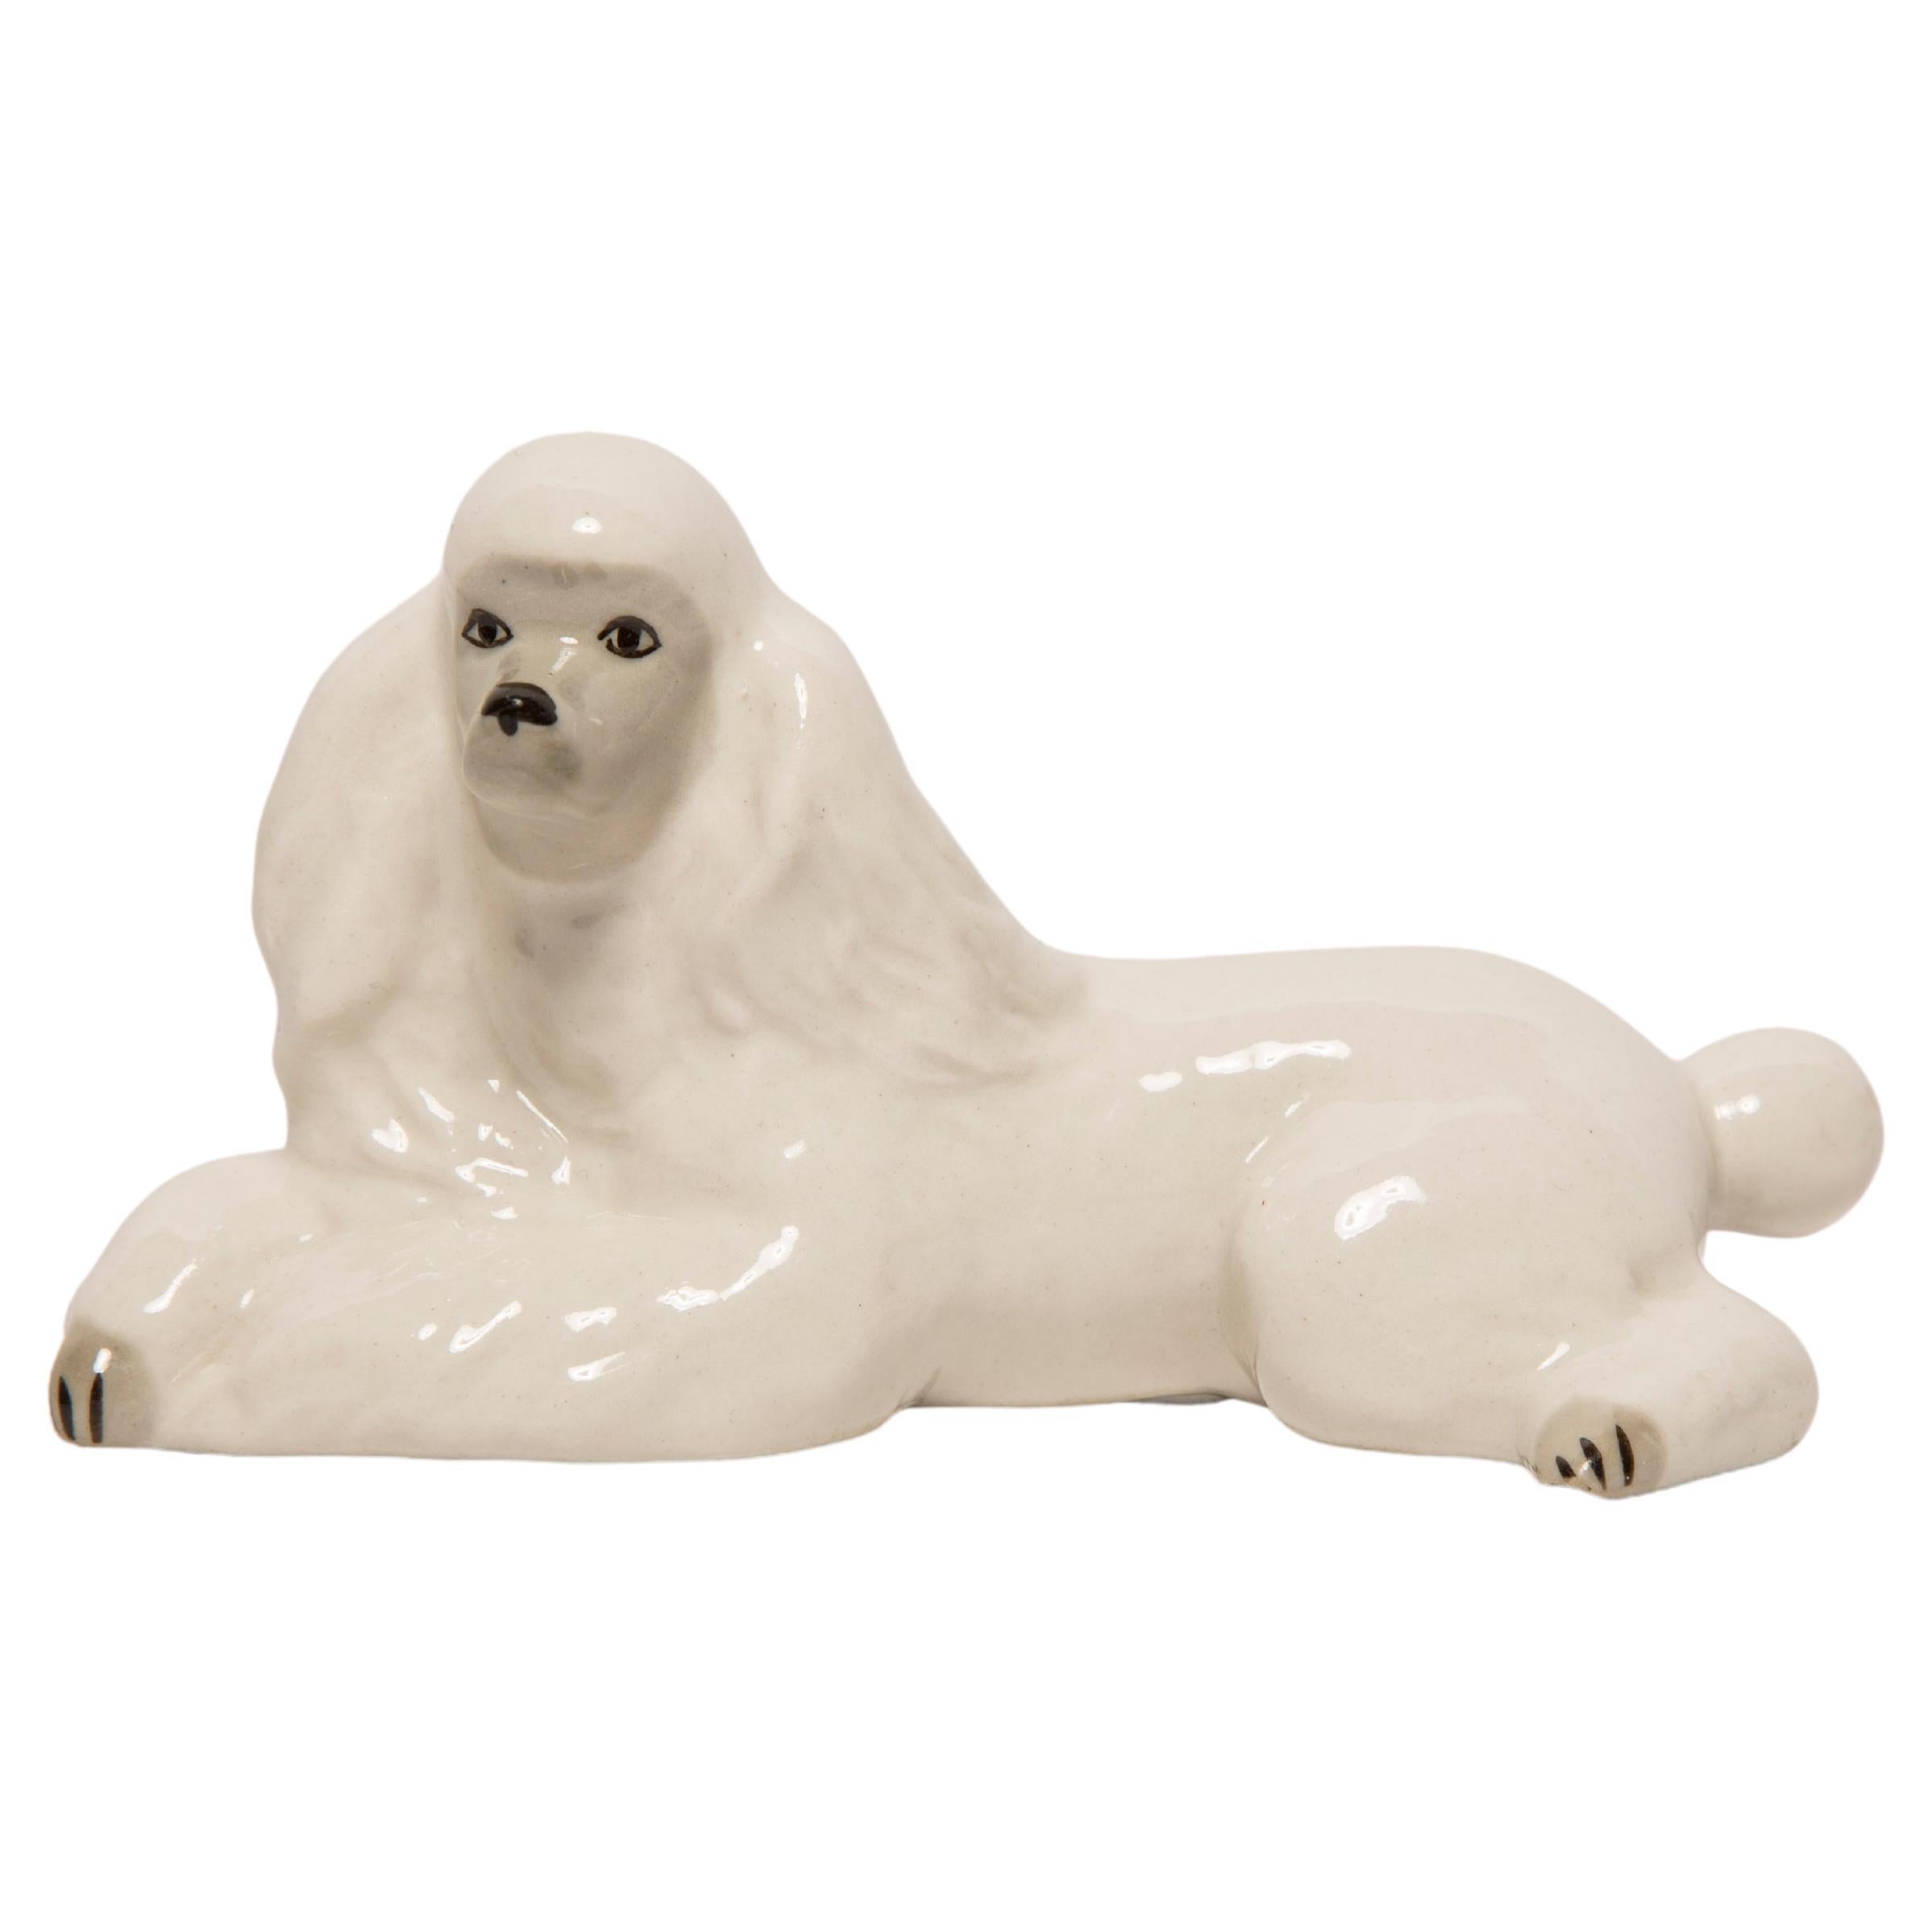 Midcentury White Poodle Ceramic Dog Sculpture, Europe, 1960s For Sale